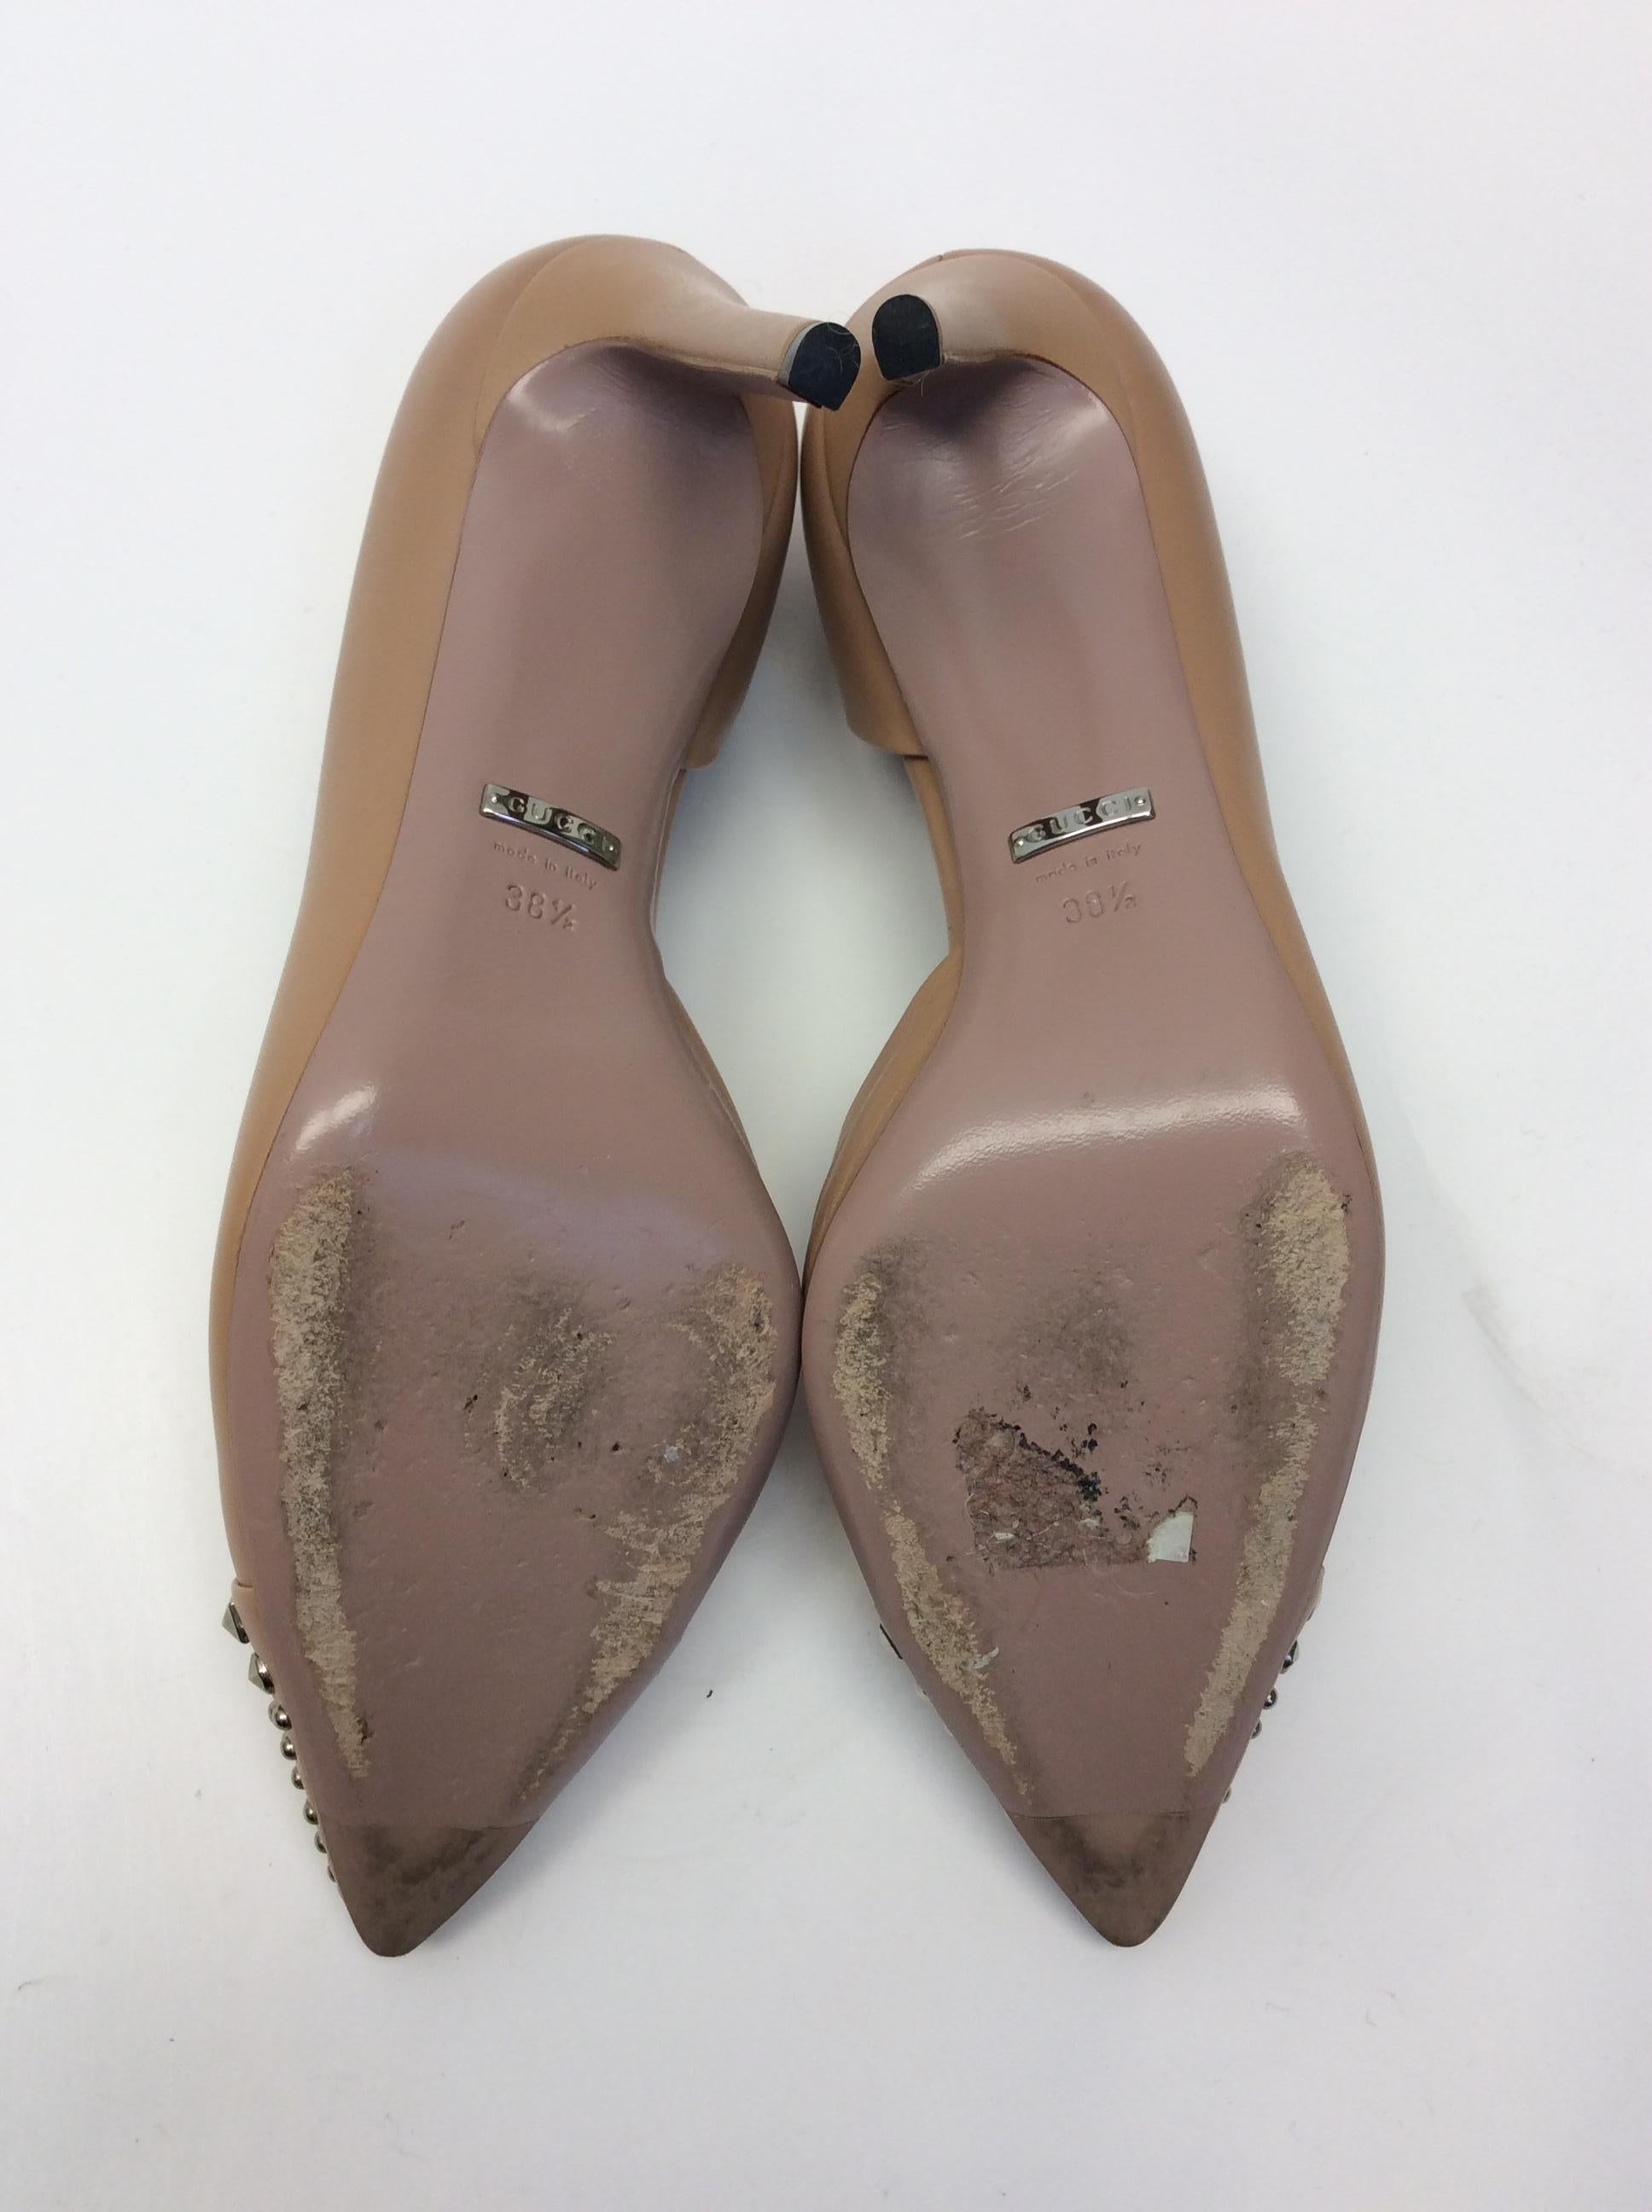 Gucci Tan Leather Studded Heels For Sale 3